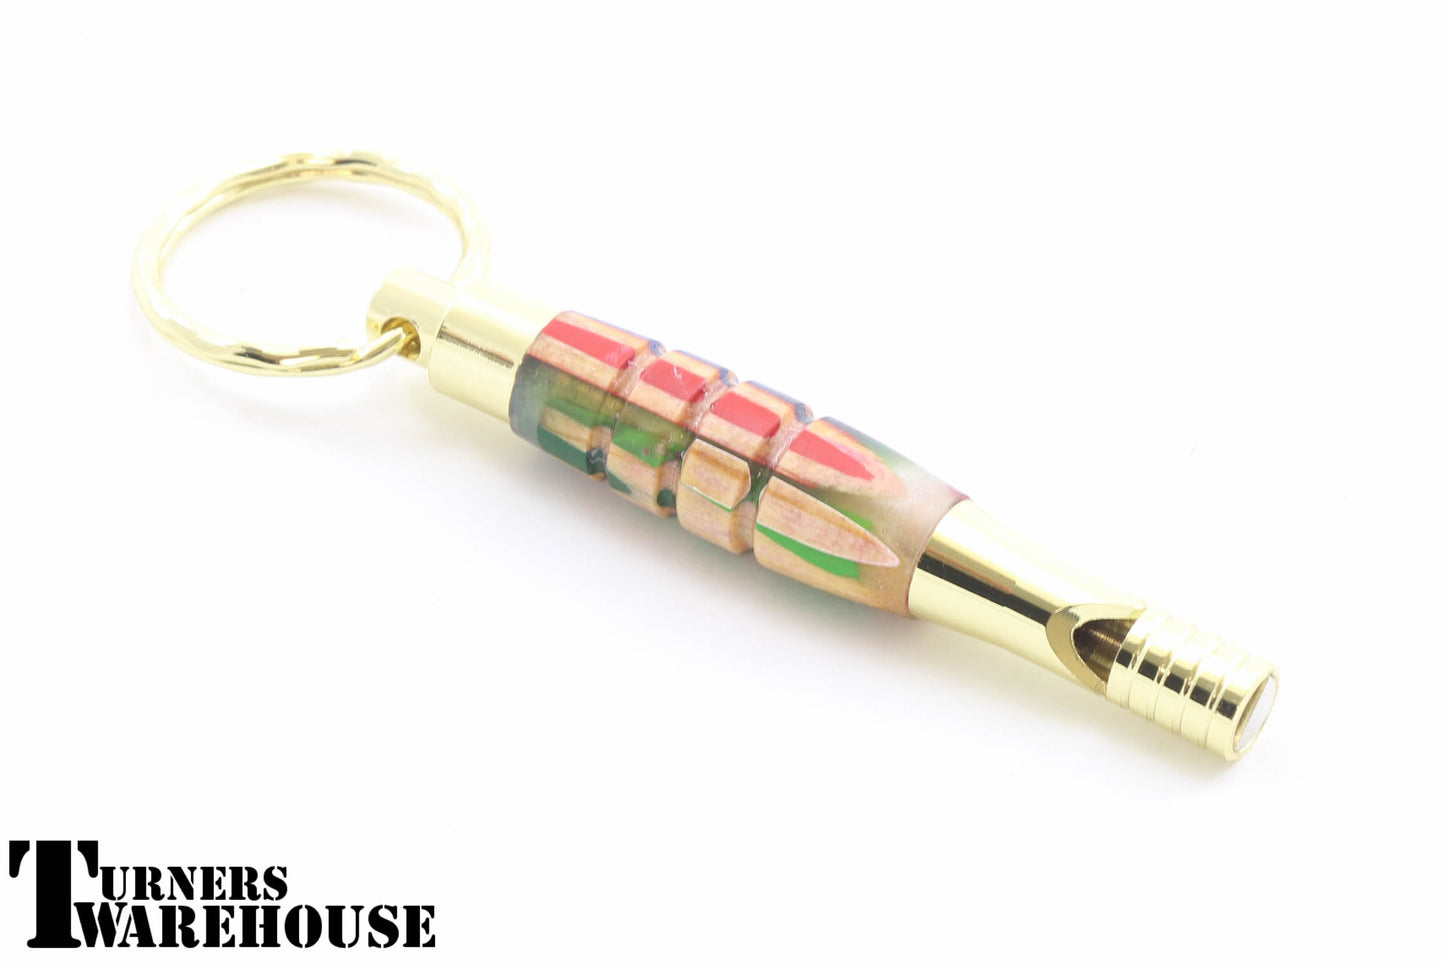 Whistle Key Chain Gold Colored Pencil Body 